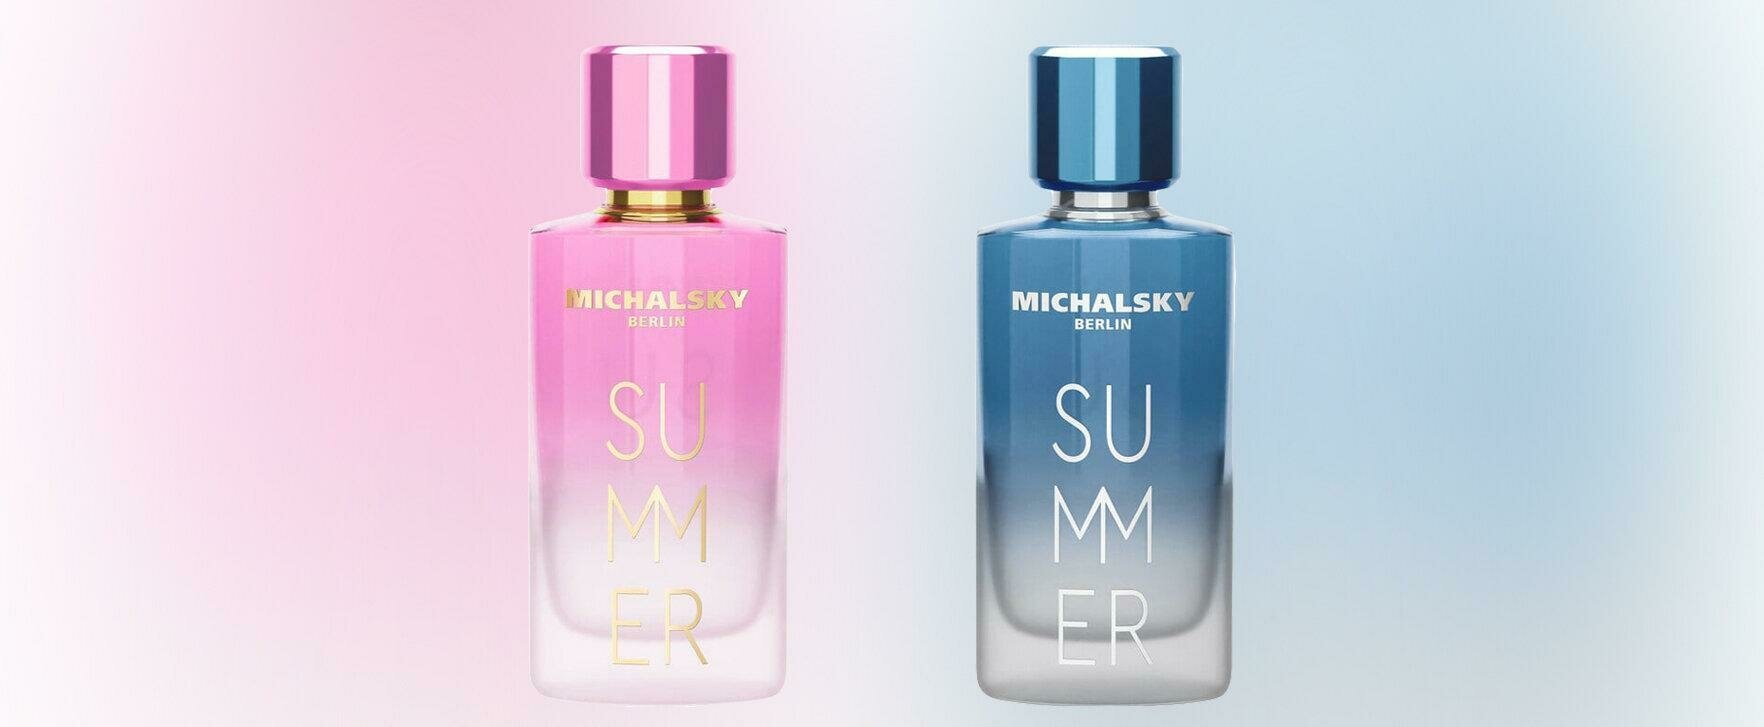 "Michalsky Berlin Summer '23 for Women" and "Michalsky Berlin Summer '23 for Men": The Limited Summer Fragrances From Michalsky